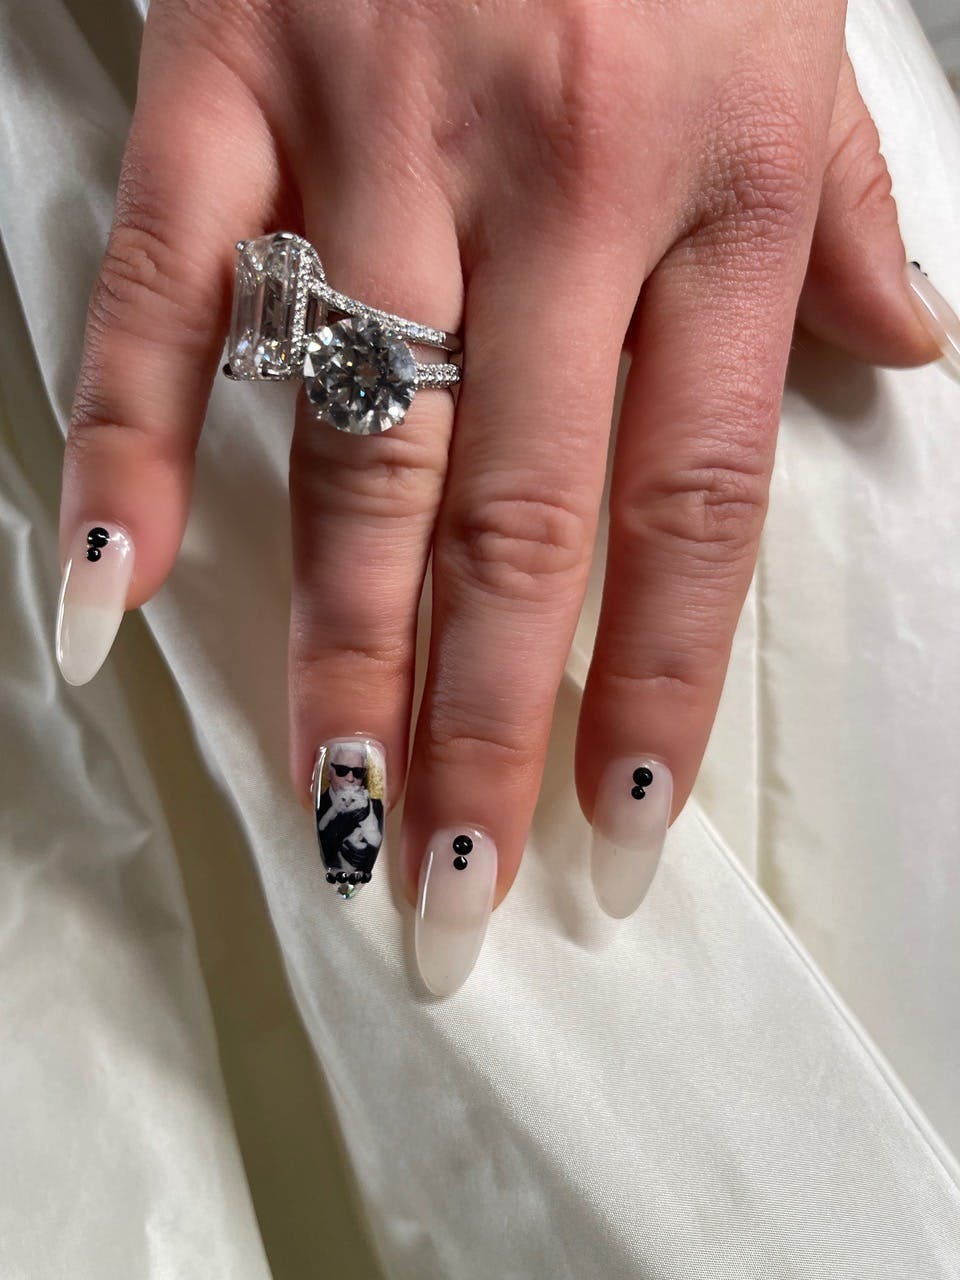 Nail artist Dawn Sterling created Florence Pugh's nails for the Met Gala using products from Manucurist Paris.